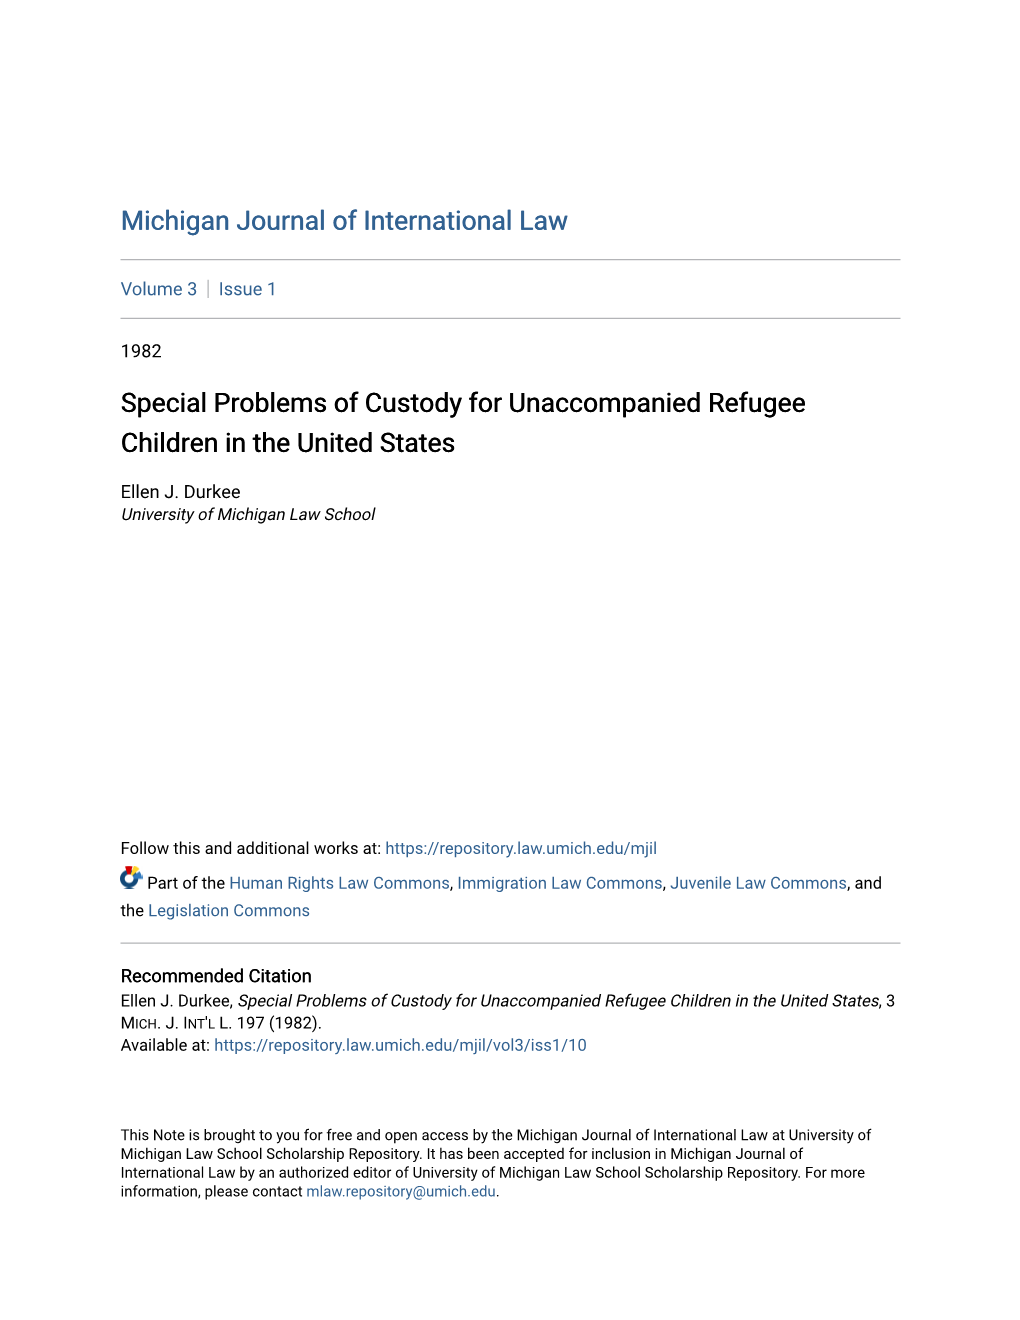 Special Problems of Custody for Unaccompanied Refugee Children in the United States